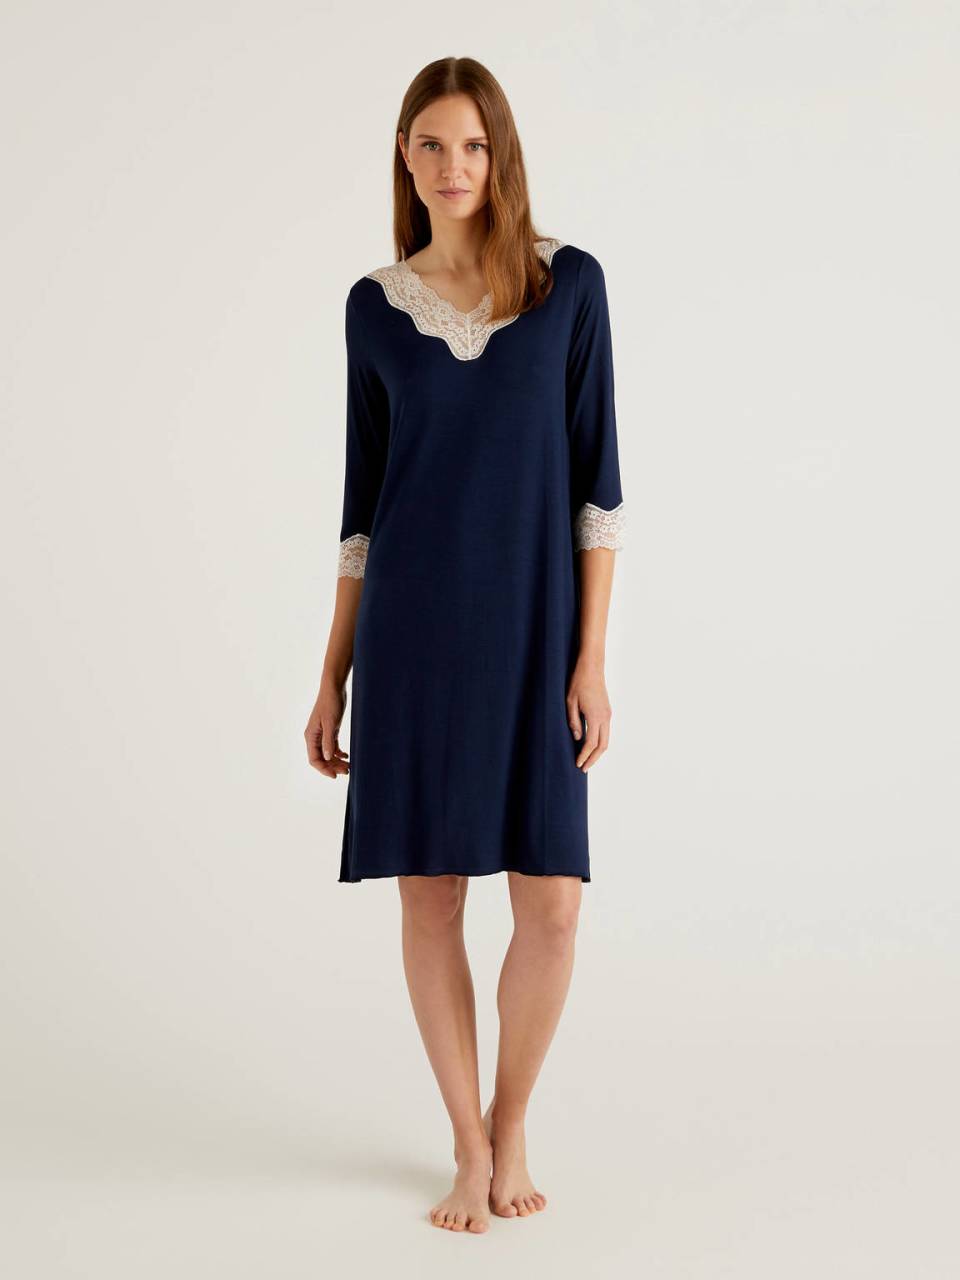 Benetton Nightshirt with lace details. 1